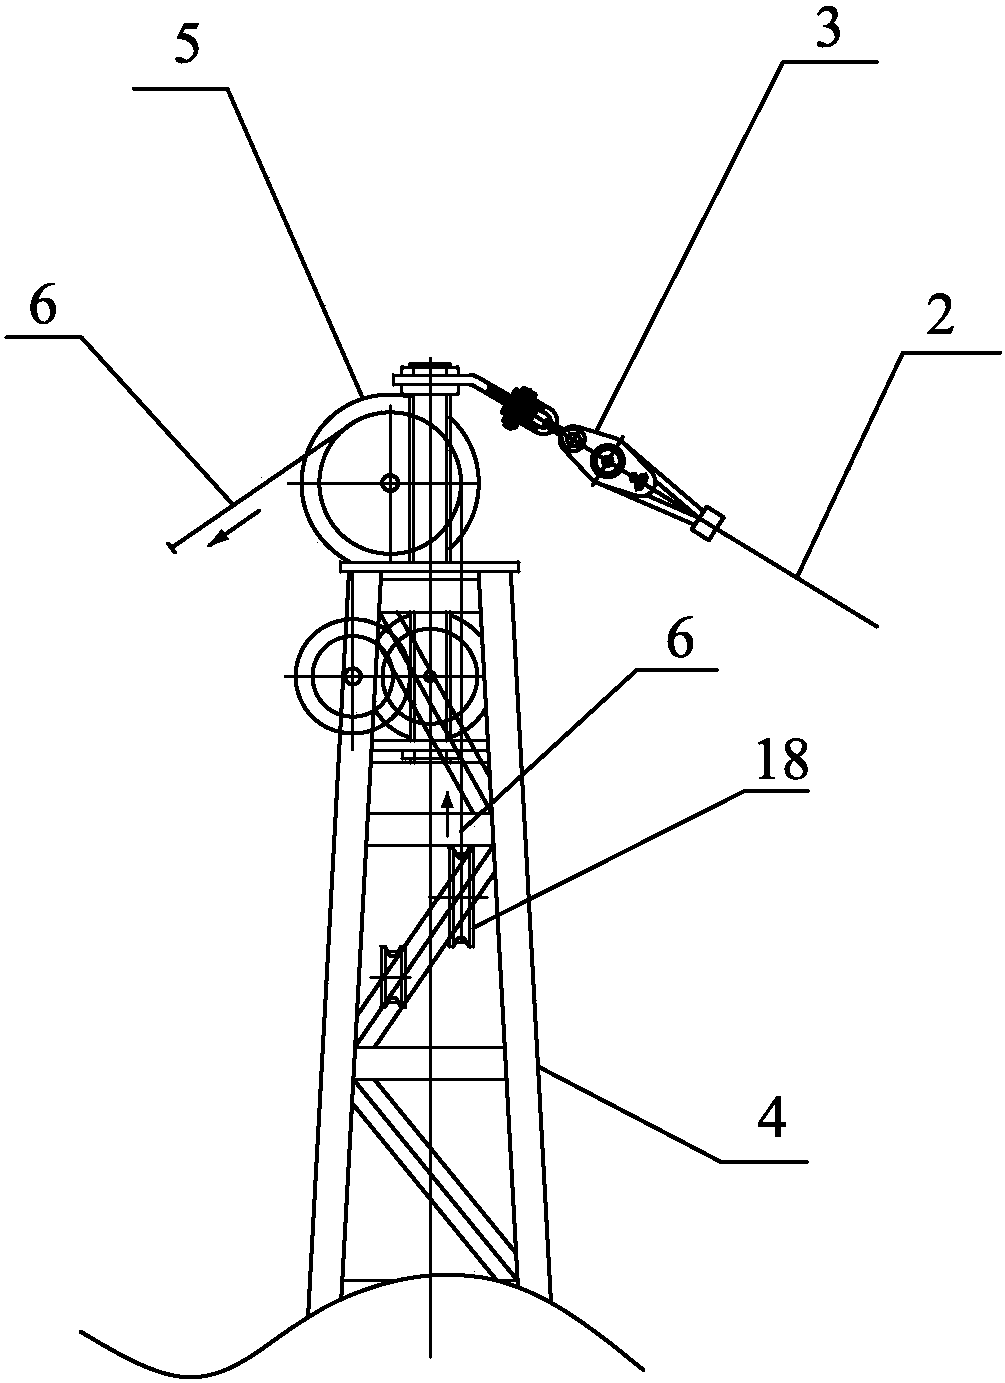 An Excavator-based Cableway Logging Device